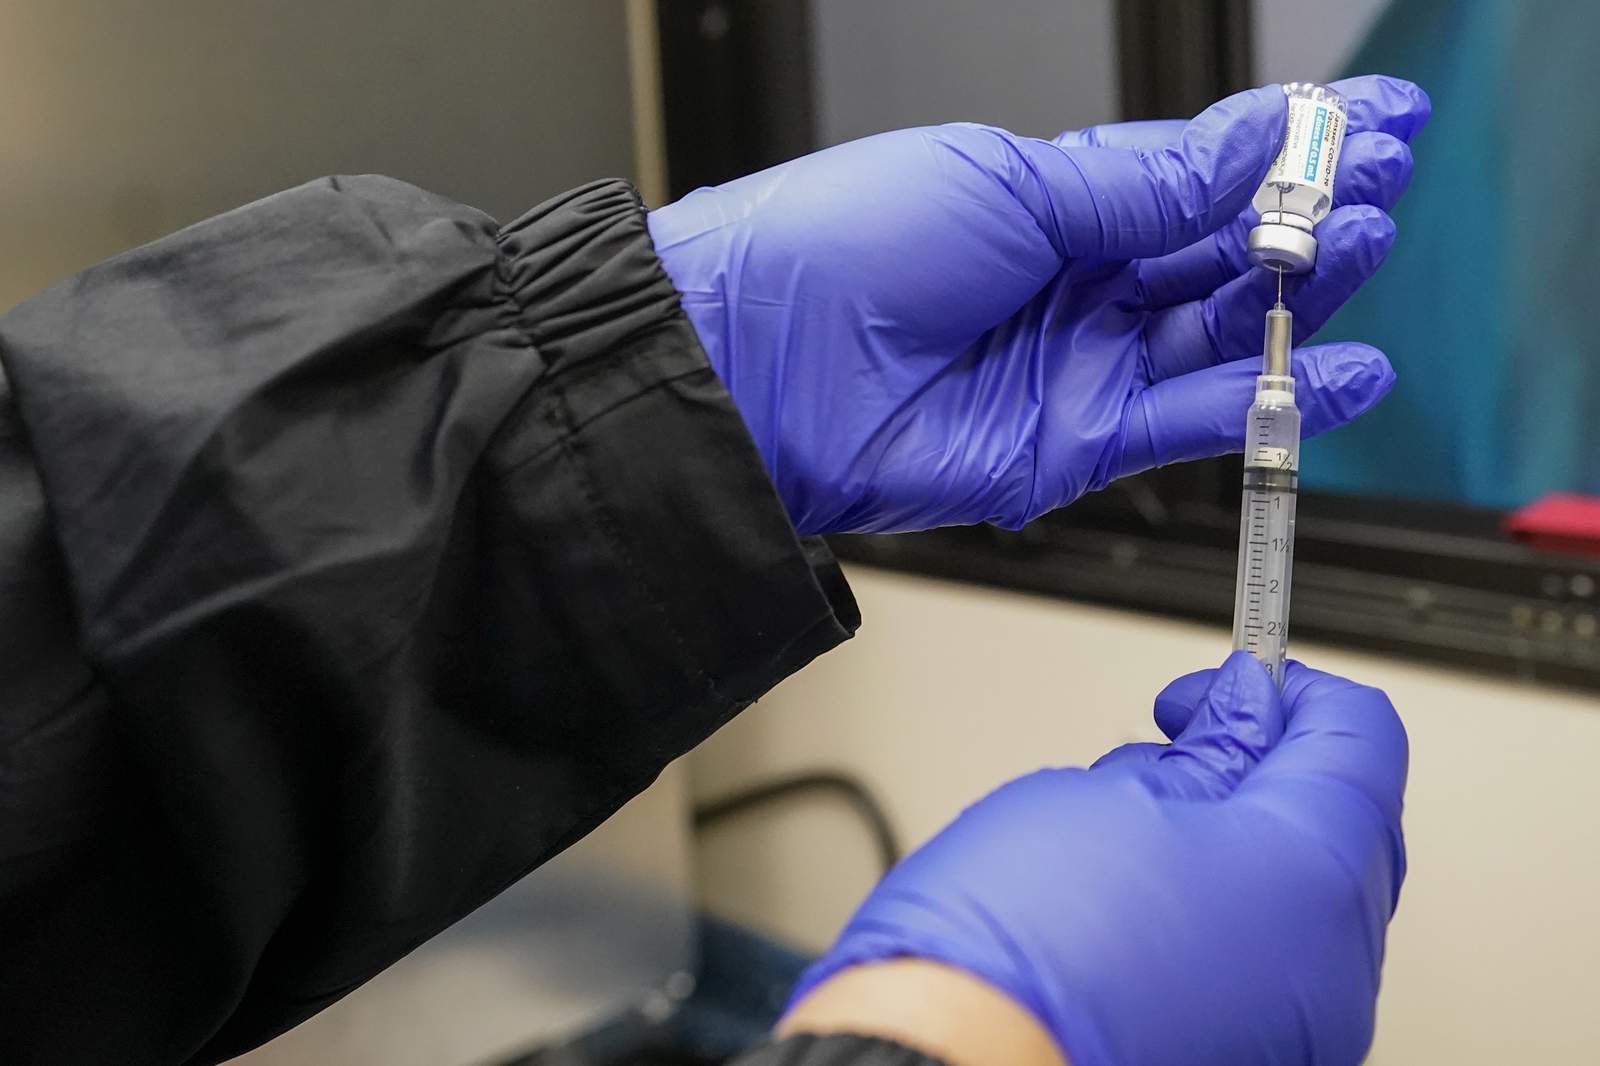 Two pop-up vaccine clinics open in Jacksonville today